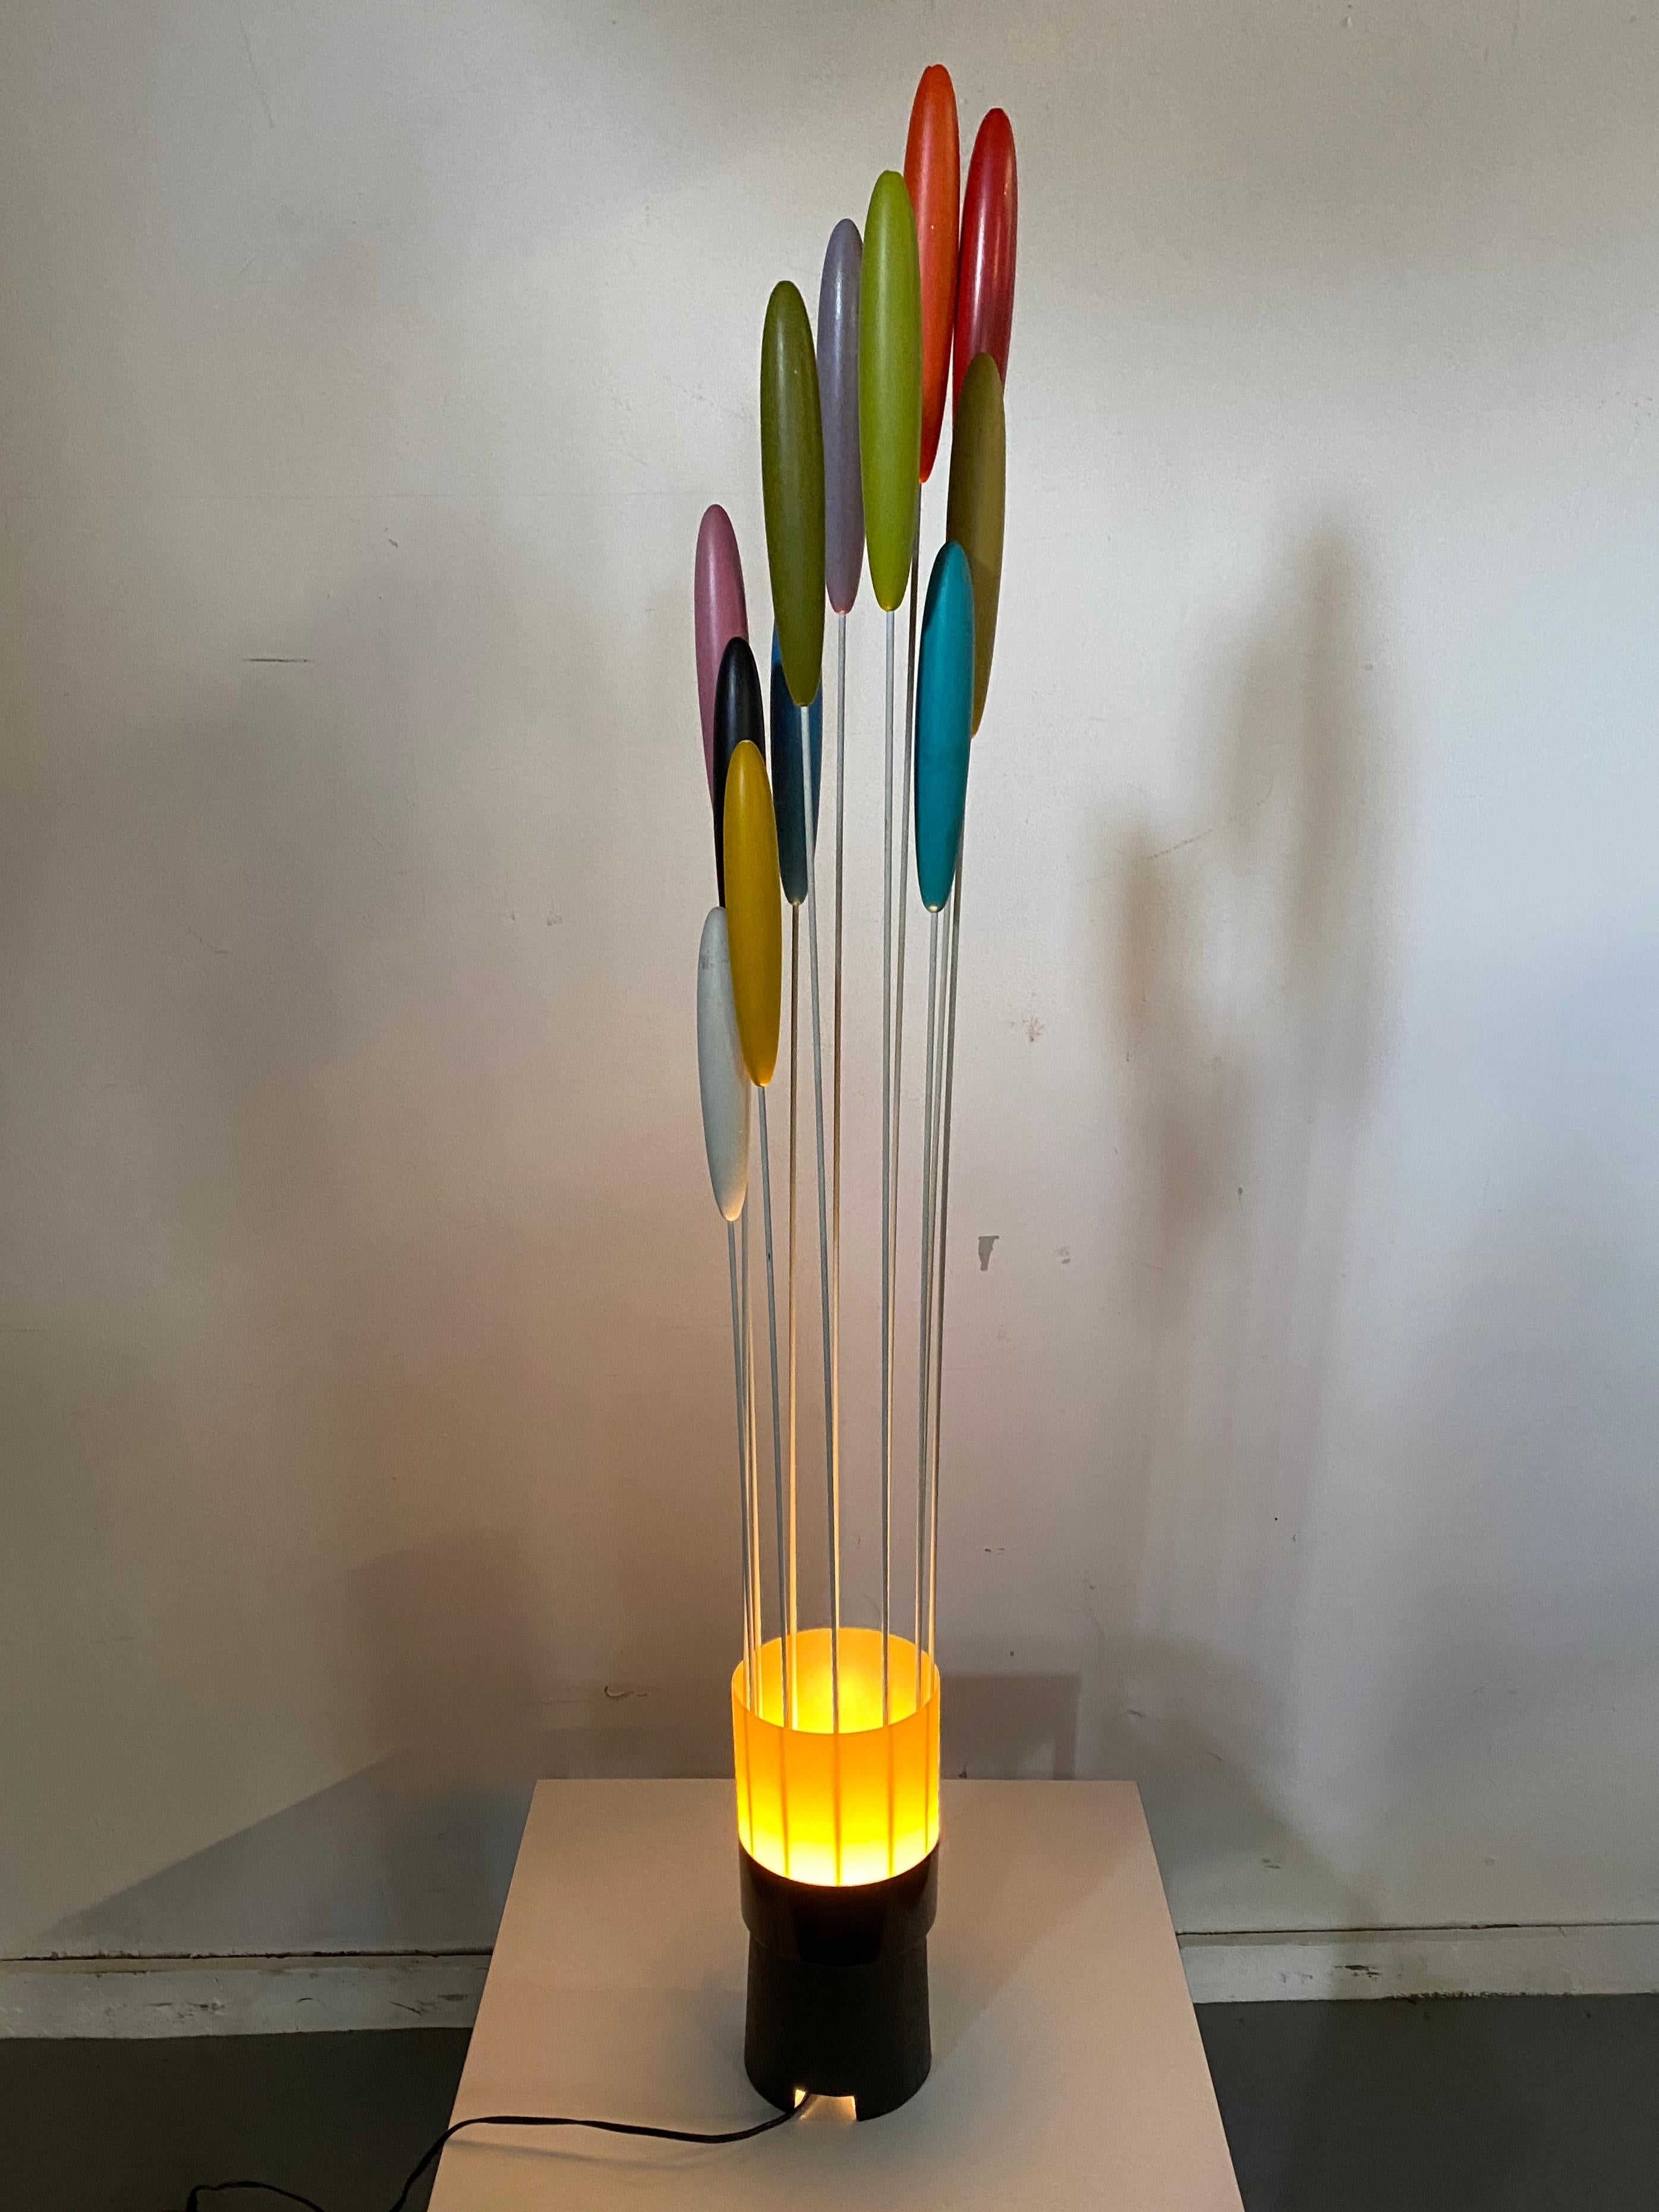 Painted Bill Curry 'Cattails' Lamp.. Iconic Modernist Design, , amazing colors